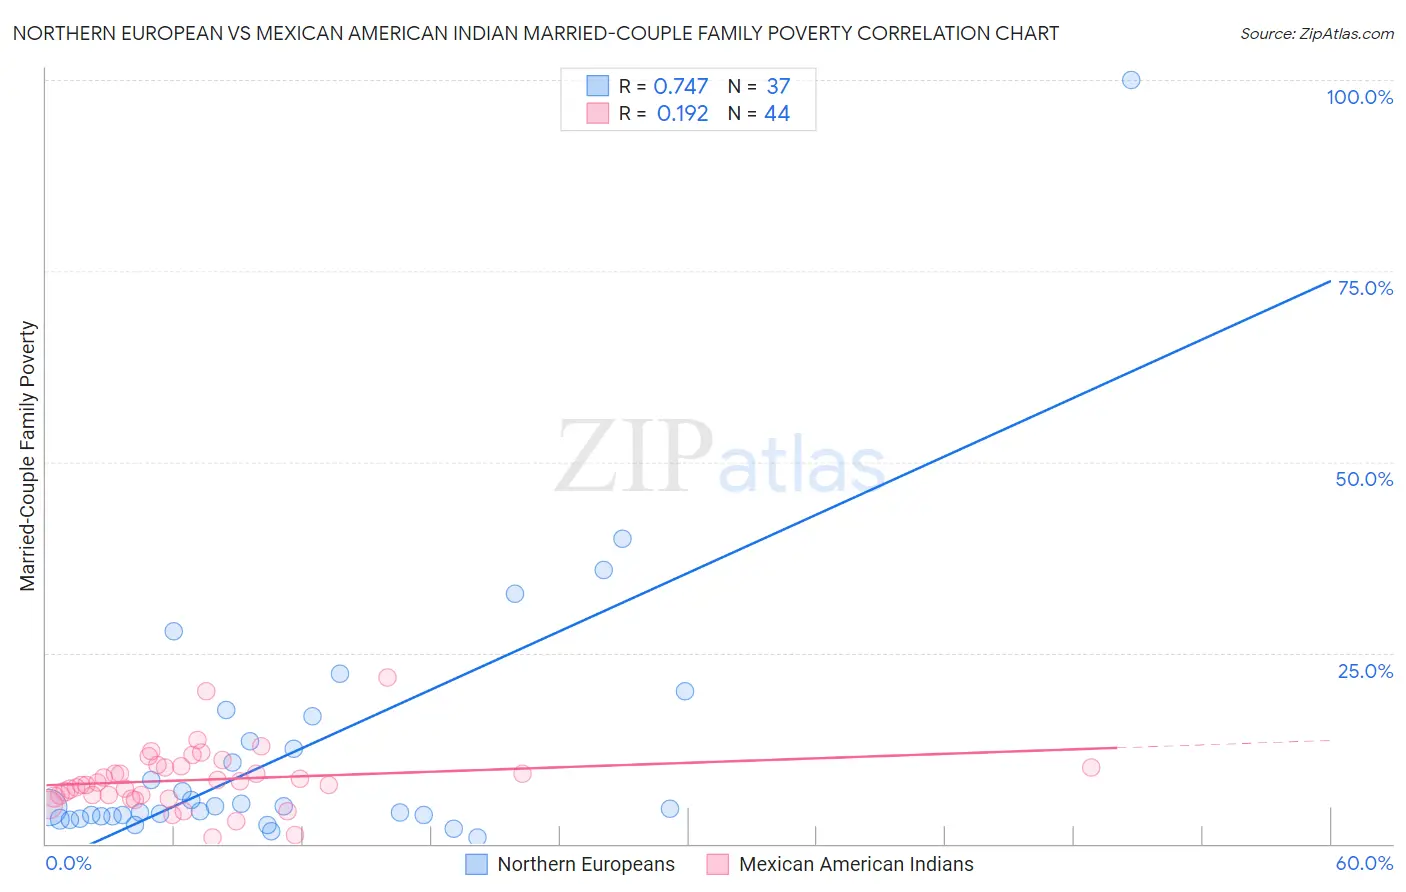 Northern European vs Mexican American Indian Married-Couple Family Poverty